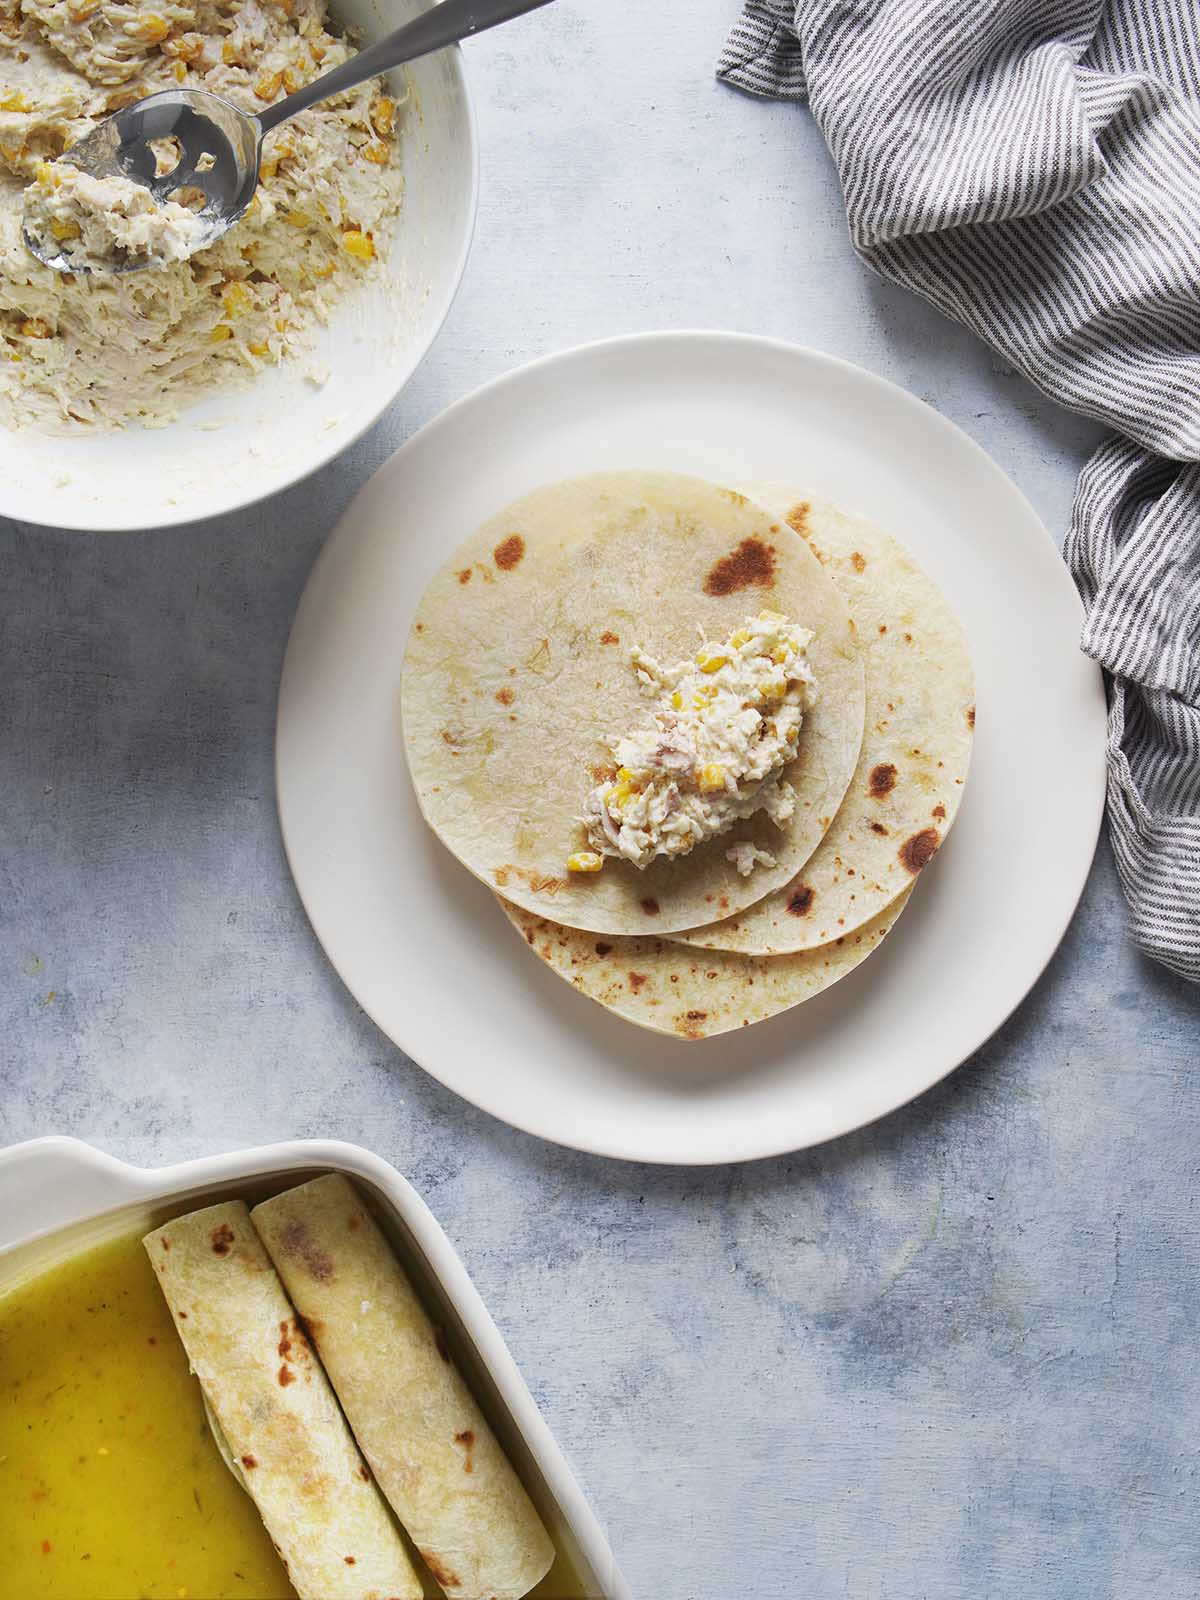 Filling tortillas with a creamy chicken mixture and then rolling them into a taquito shape.